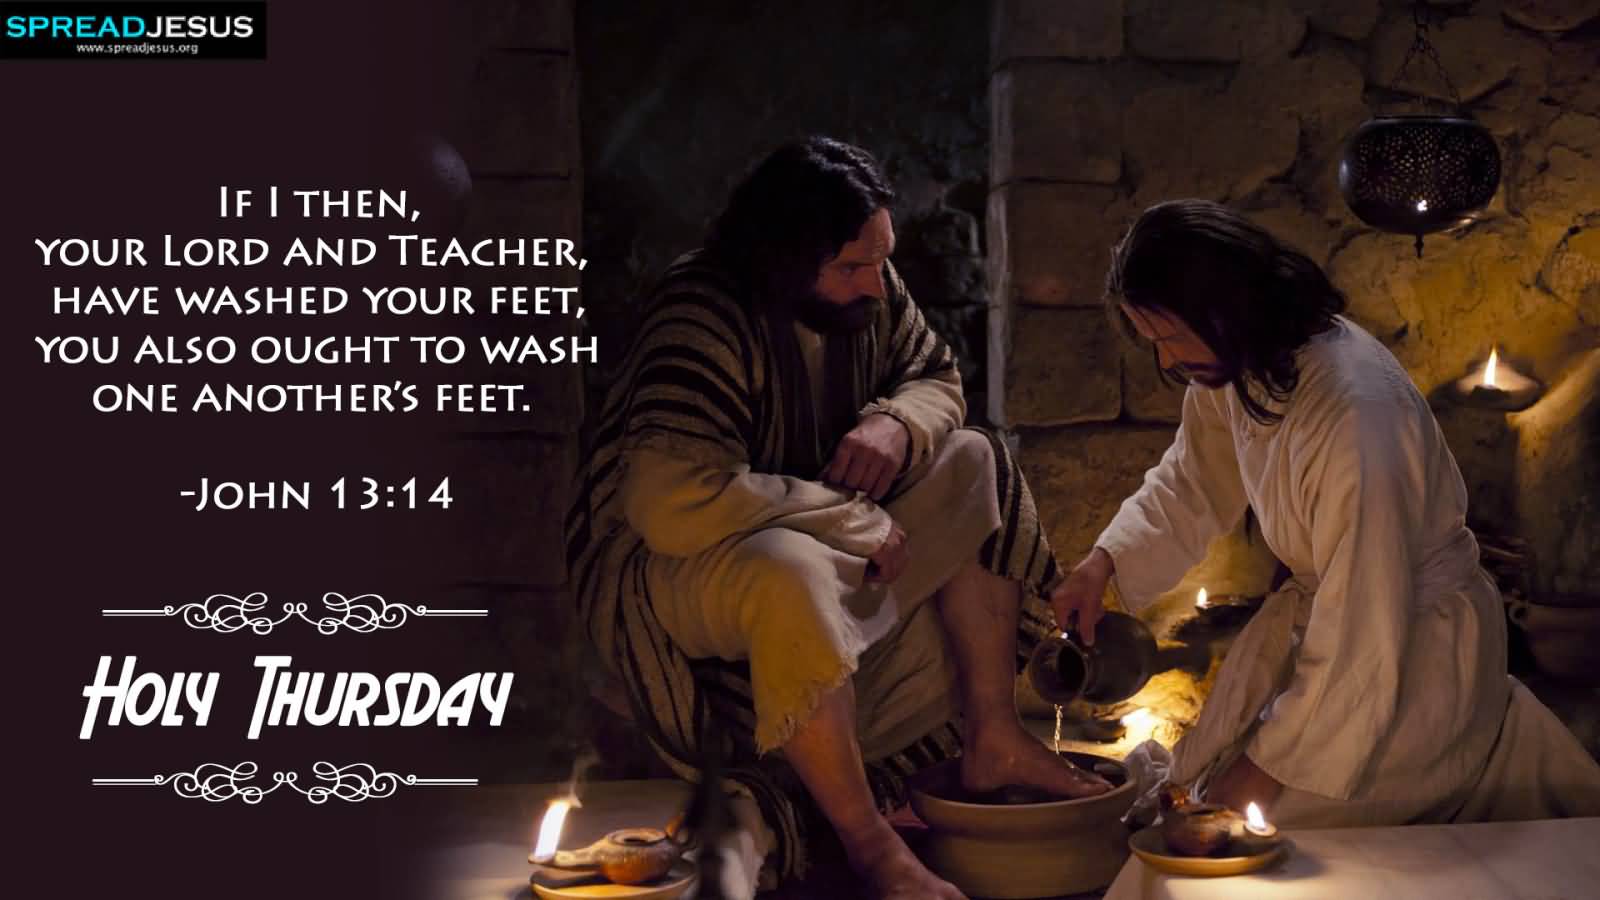 If I Then Your Lord And Teacher Have Washed Your Feet, You Also Ought To Wash One Another's Feet. Holy Thursday